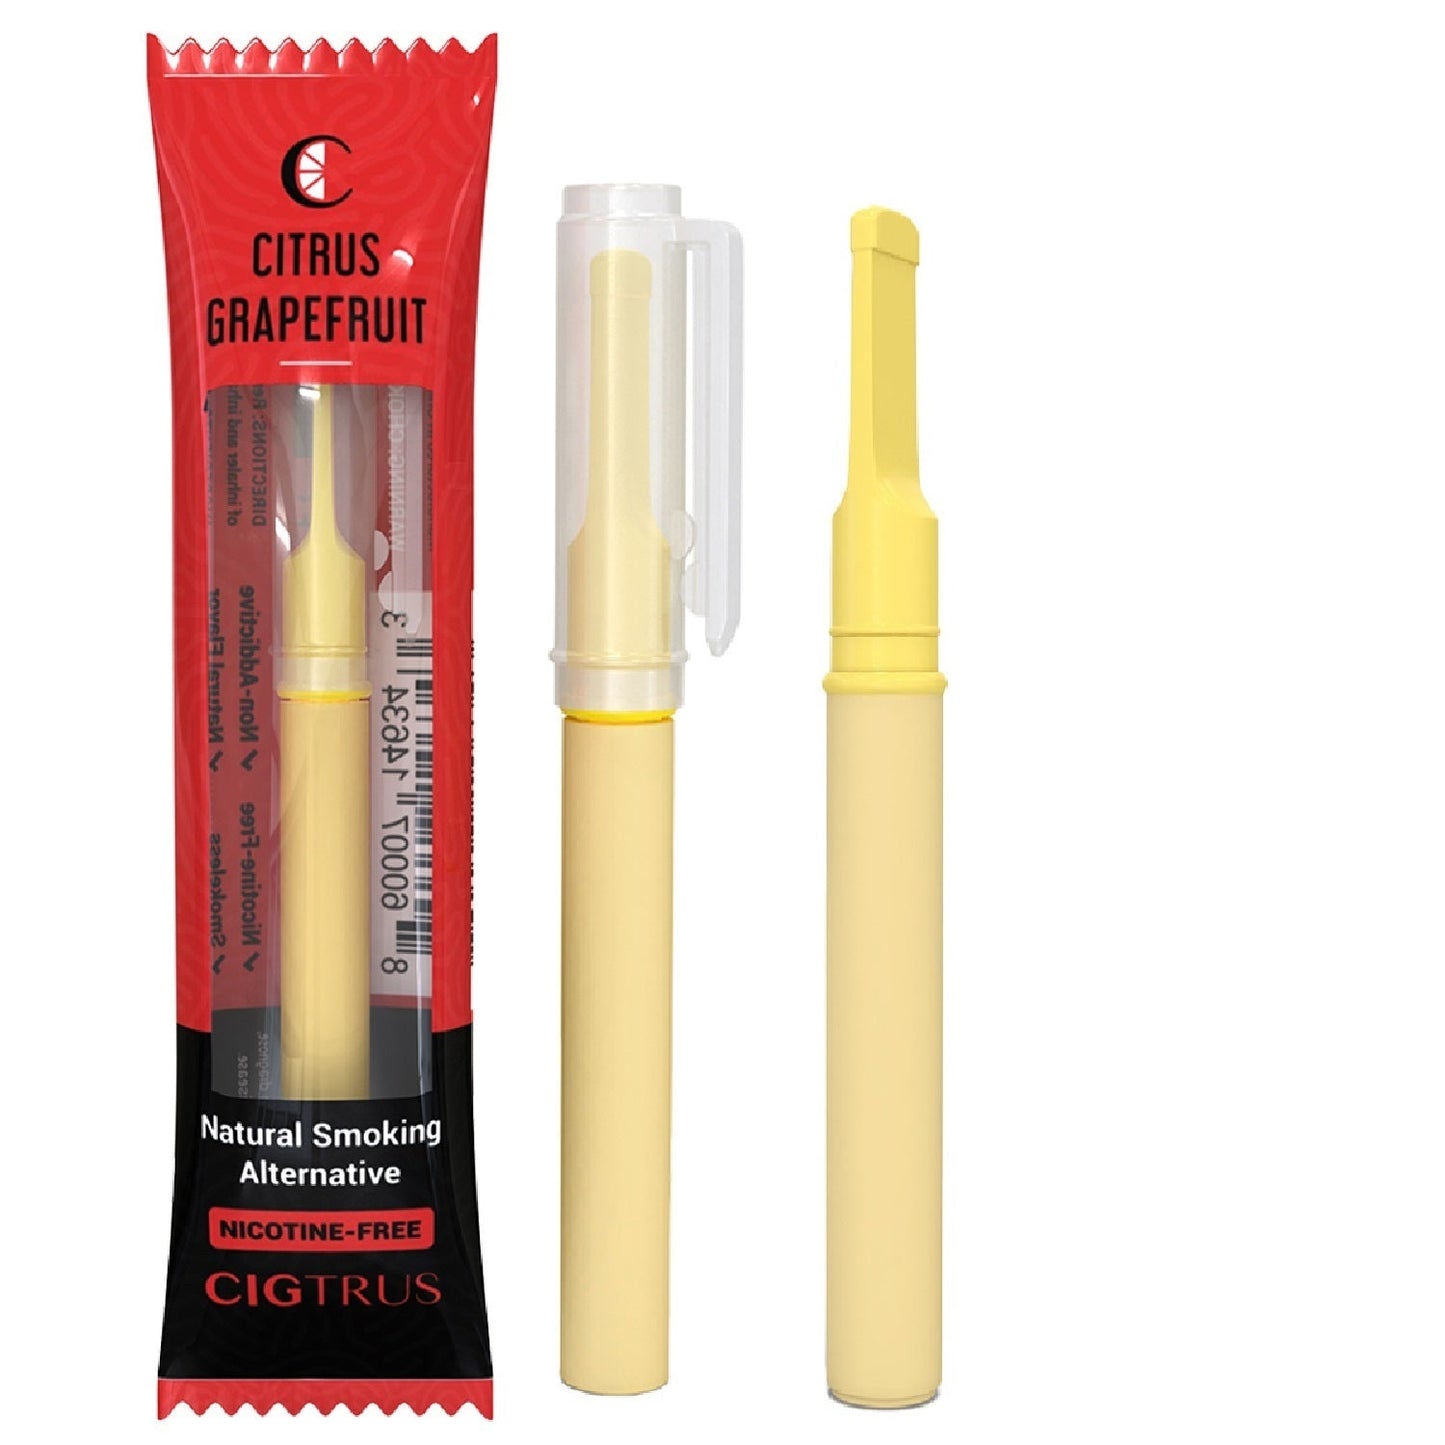 Cigtrus Oxygen Aroma Inhalers - Portable Oral Fixation Relief Aid With Natural Ingredients & Plant Oils - Non-Electric Stop Smoking Inhaler - No Tobacco Or Nicotine - 4 Flavor 5 Each Variety Box Of 20 - cigtrus.comcigtrus.com